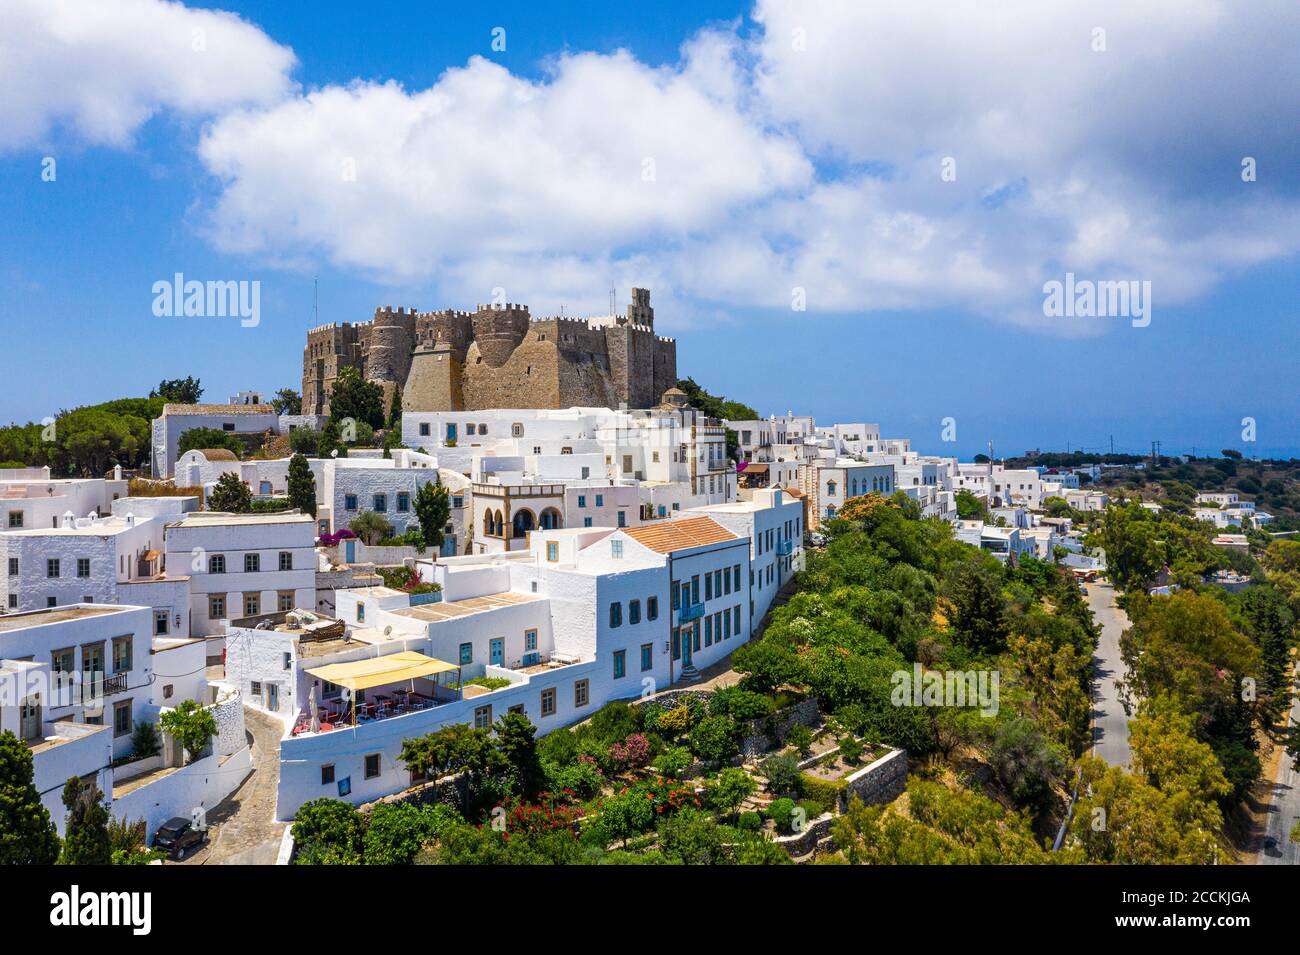 Greece, South Aegean, Patmos, Aerial view ofMonastery of Saint John the Theologian and surrounding town Stock Photo